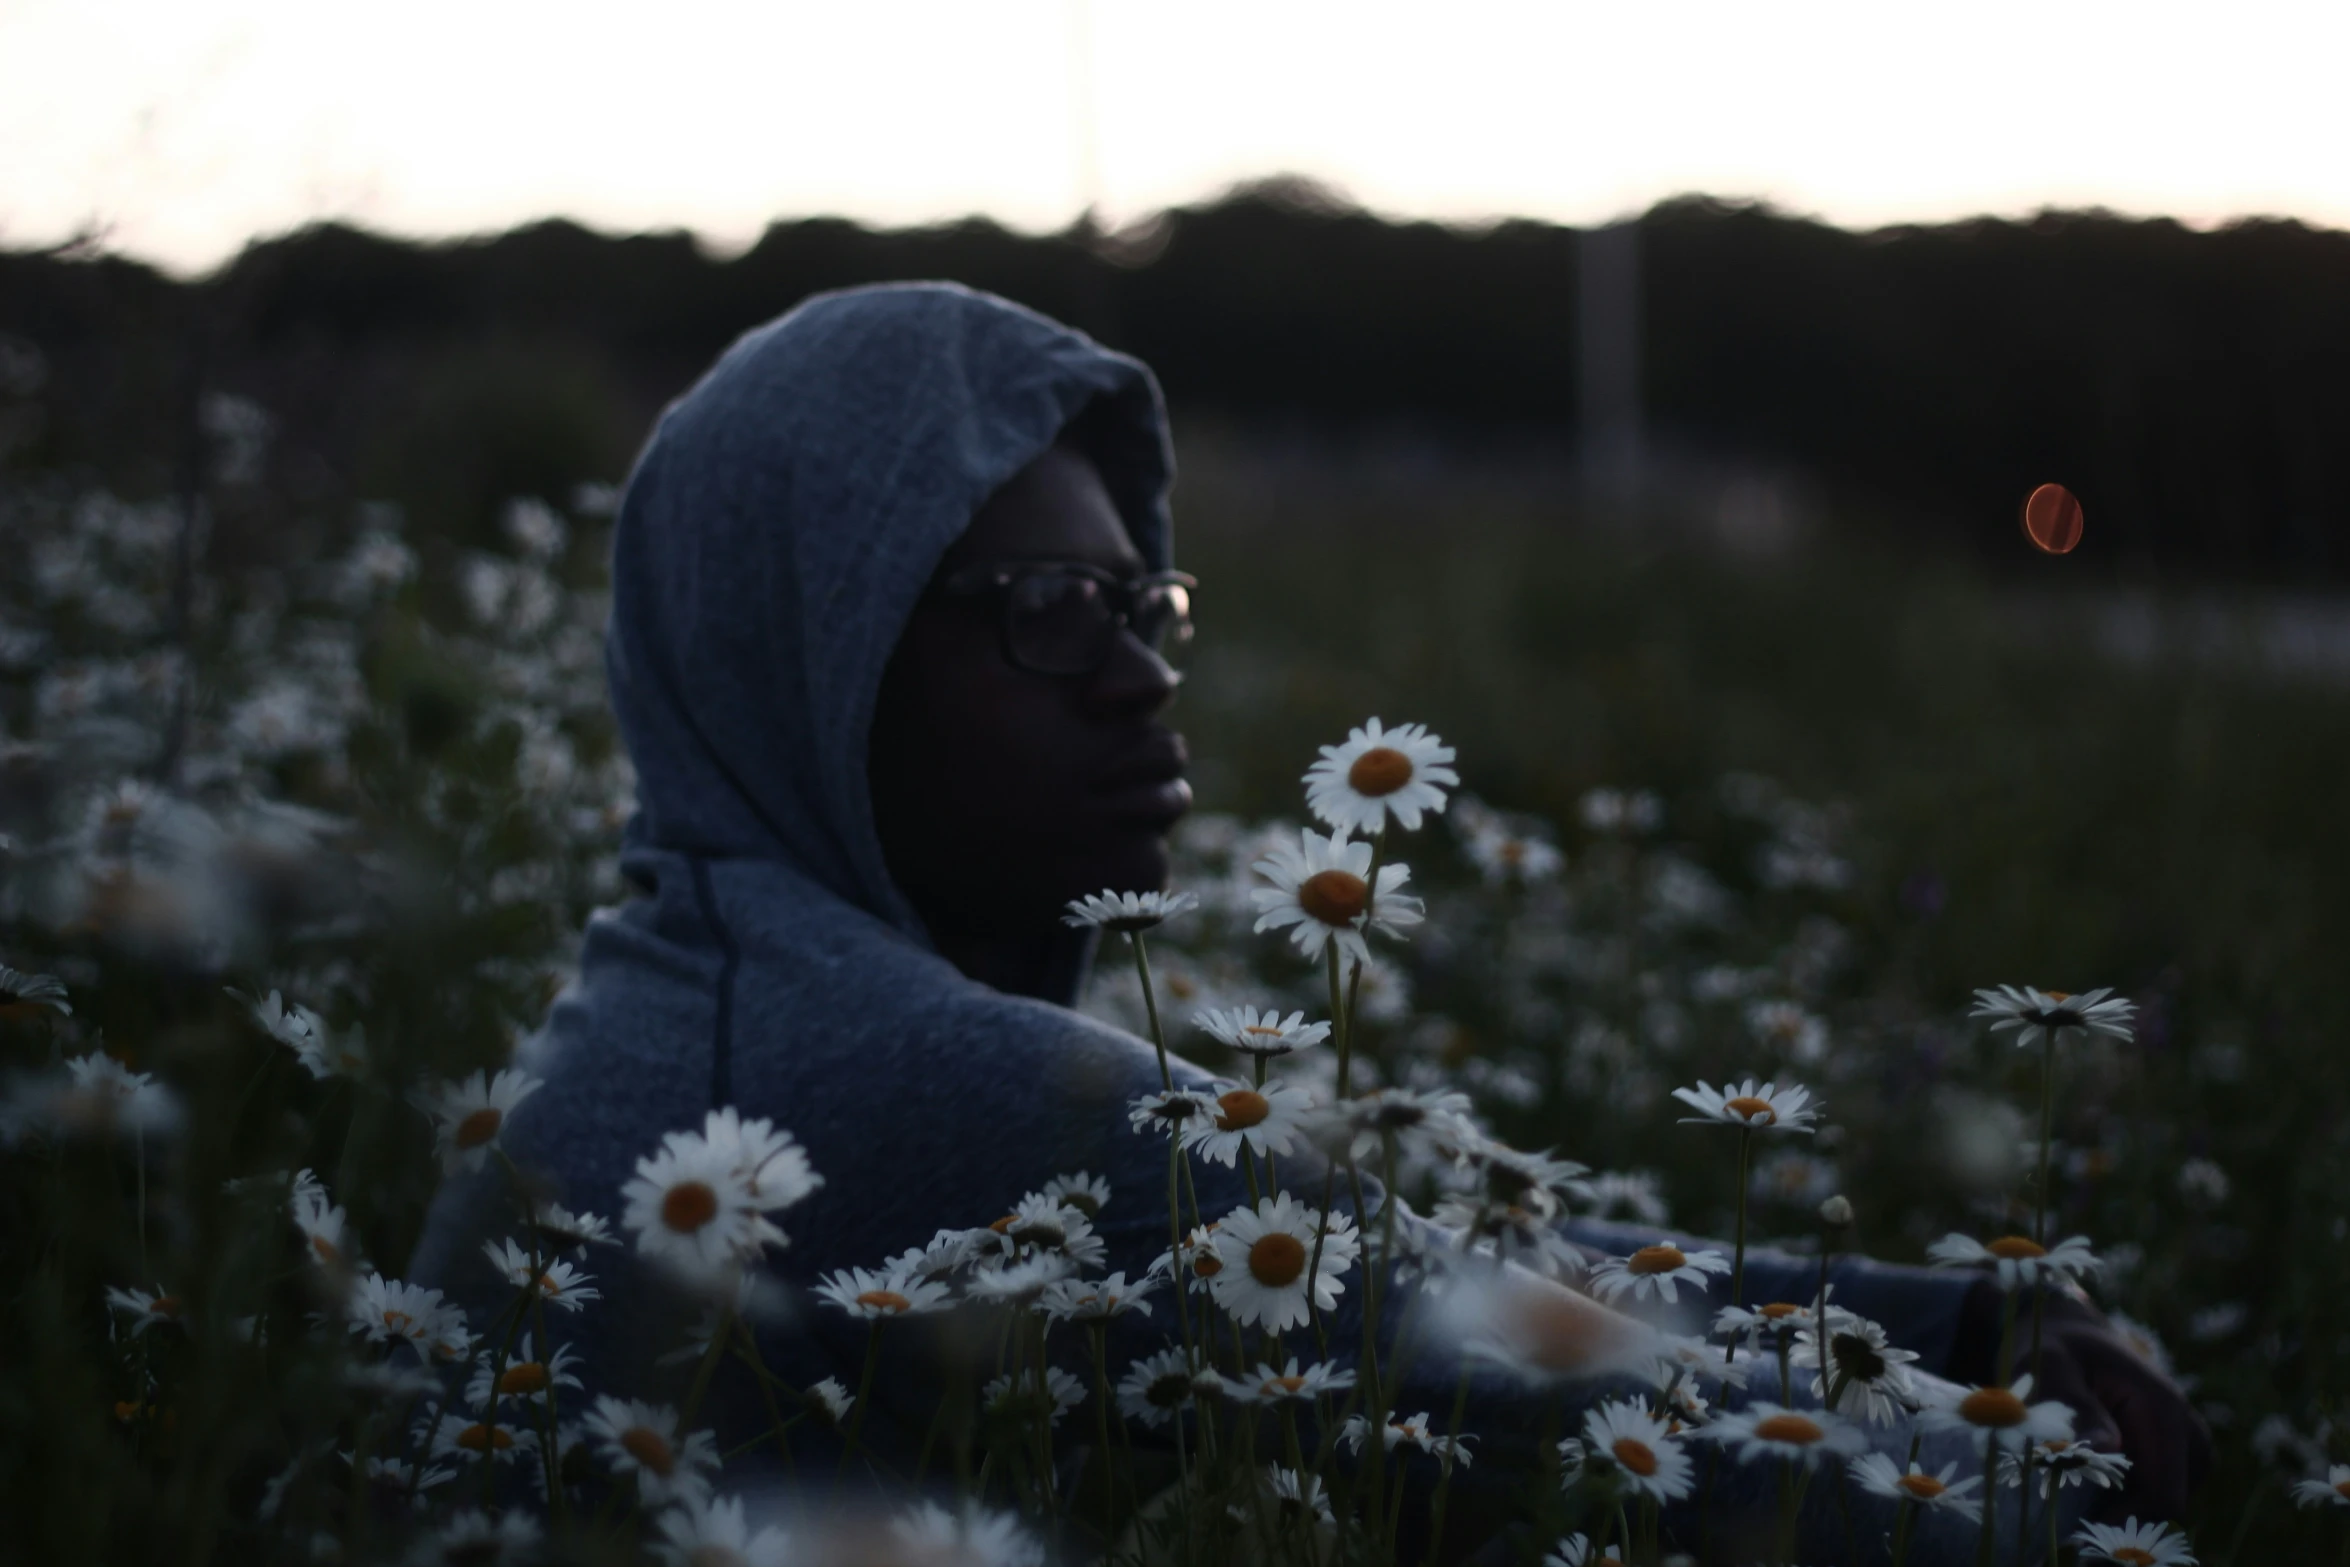 a person wearing glasses sitting in a field of flowers